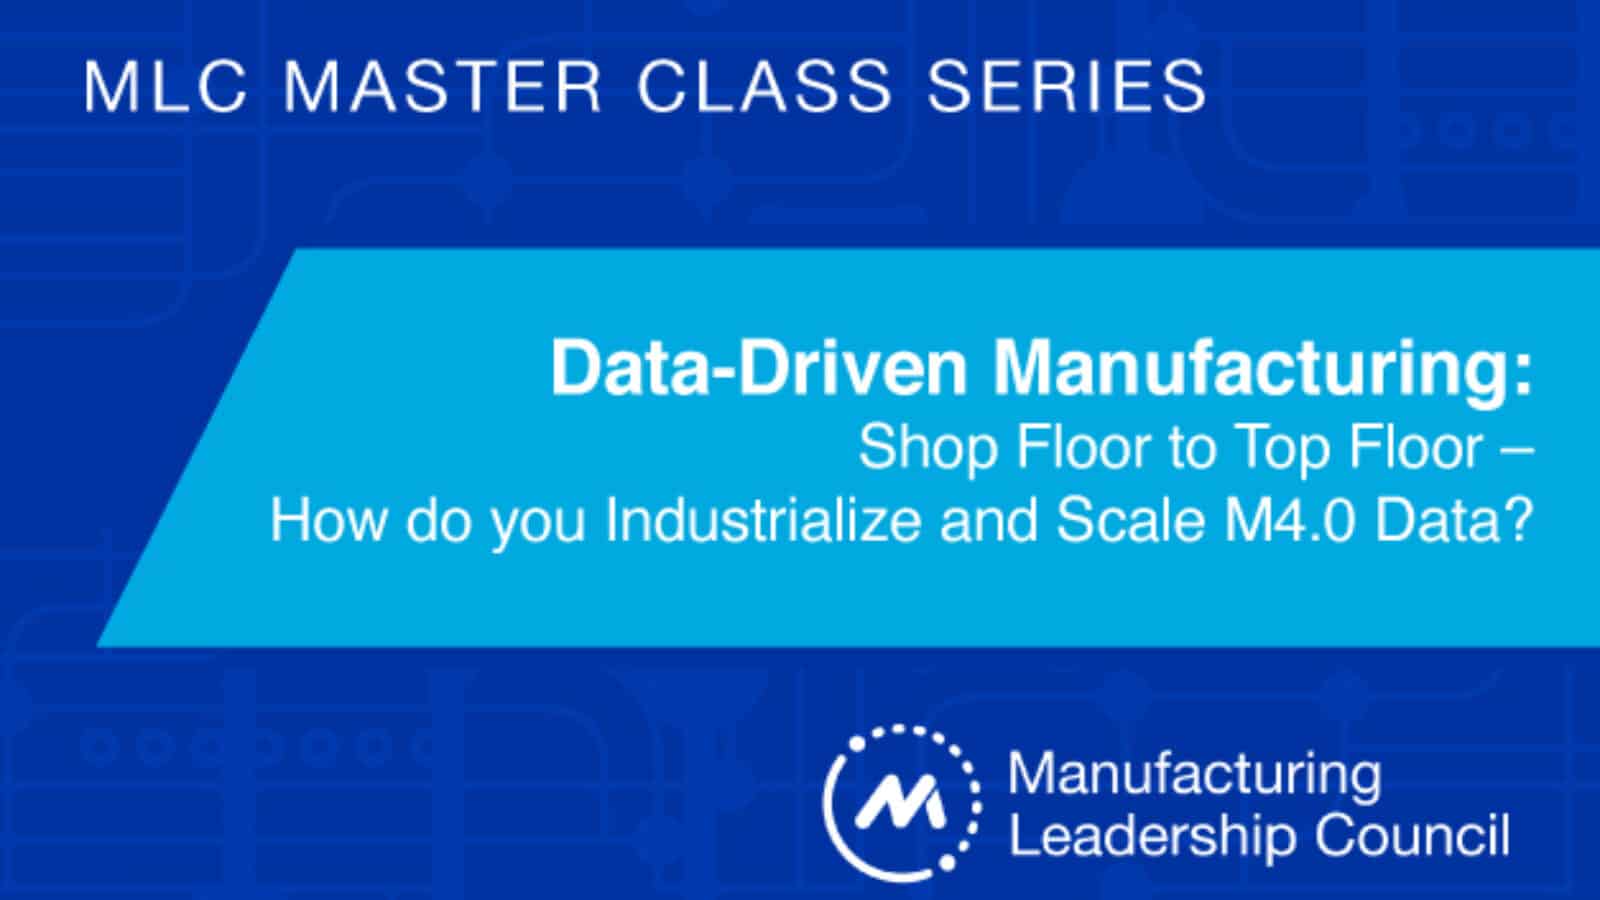 Data-driven Manufacturing: Shop Floor to Top Floor — How Do You Industrialize and Scale M4.0 Data?